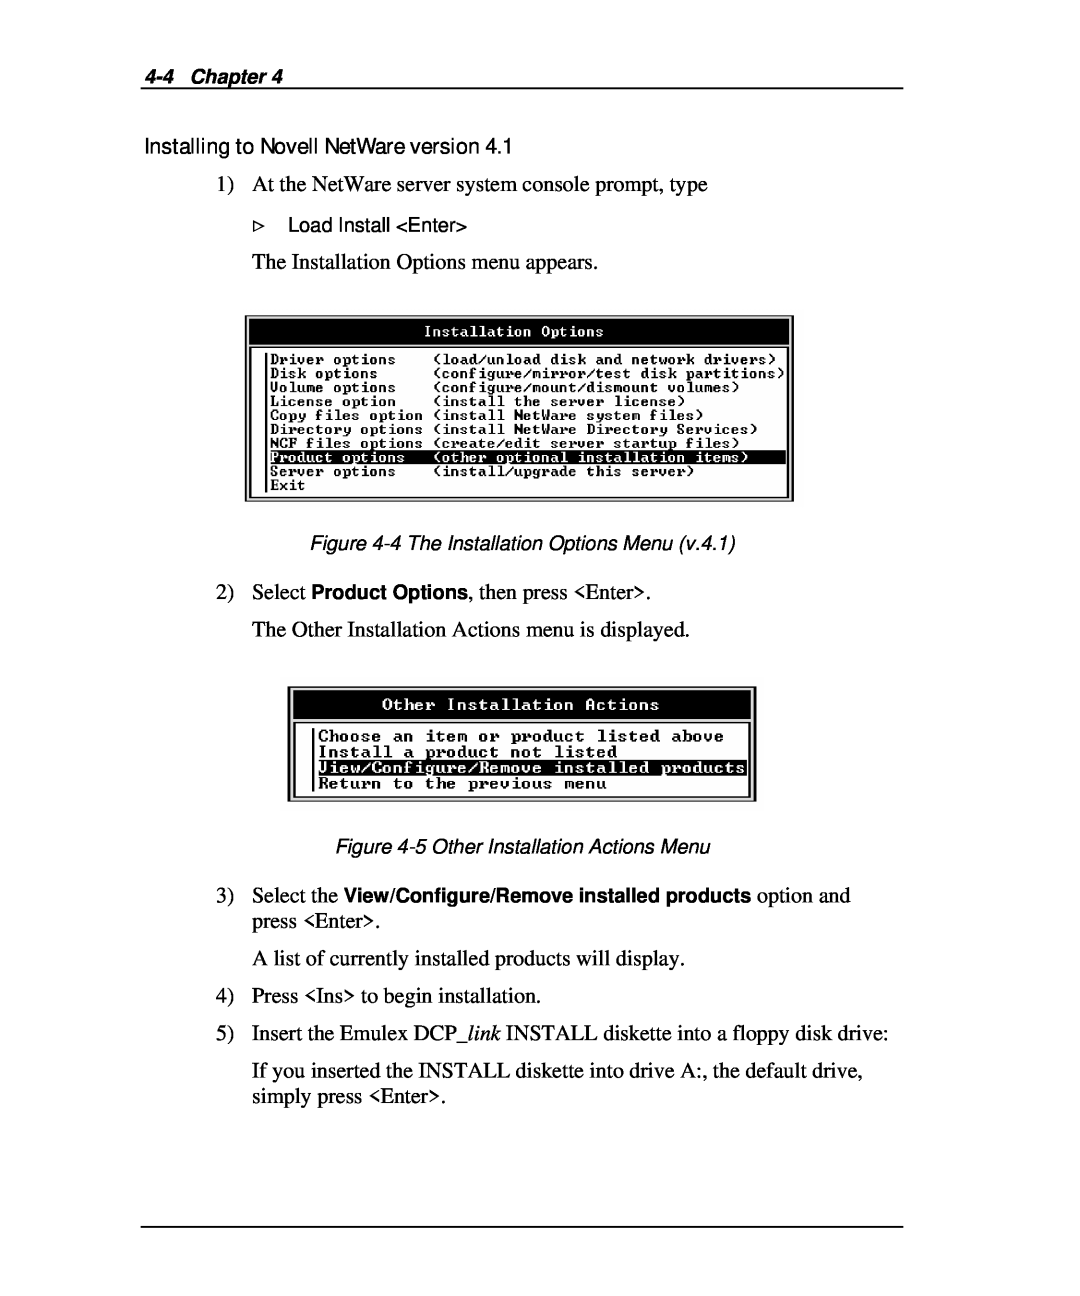 Emulex DCP_link manual Installing to Novell NetWare version, Chapter, 4 The Installation Options Menu 